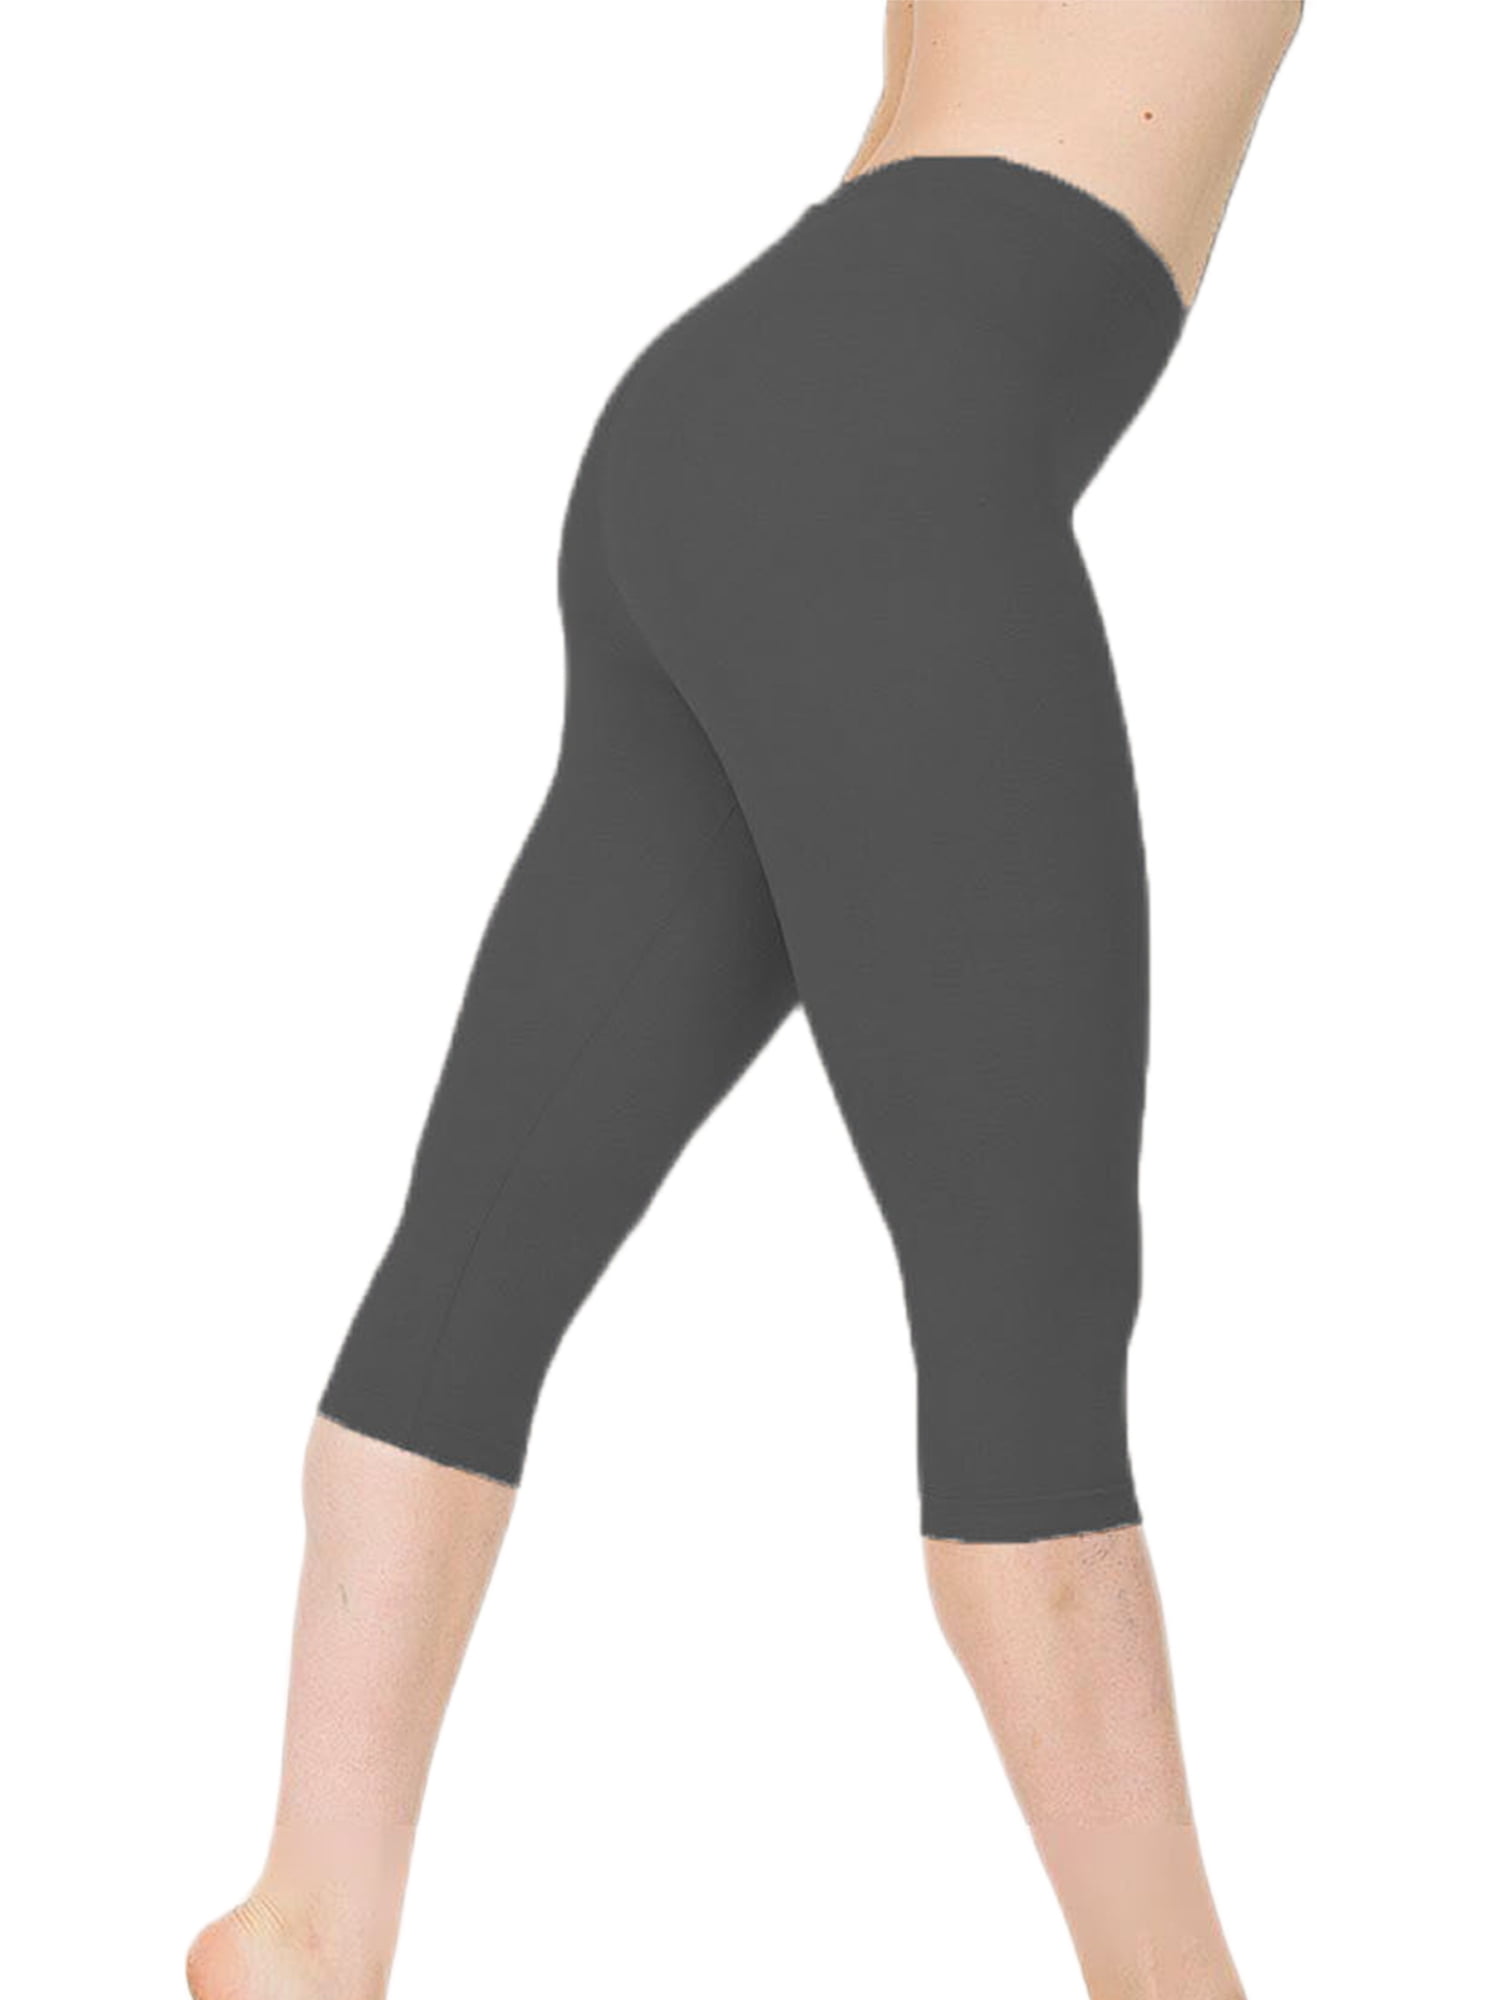 Frontwalk Women Solid Color Leggings Workout Yoga Tight Pants